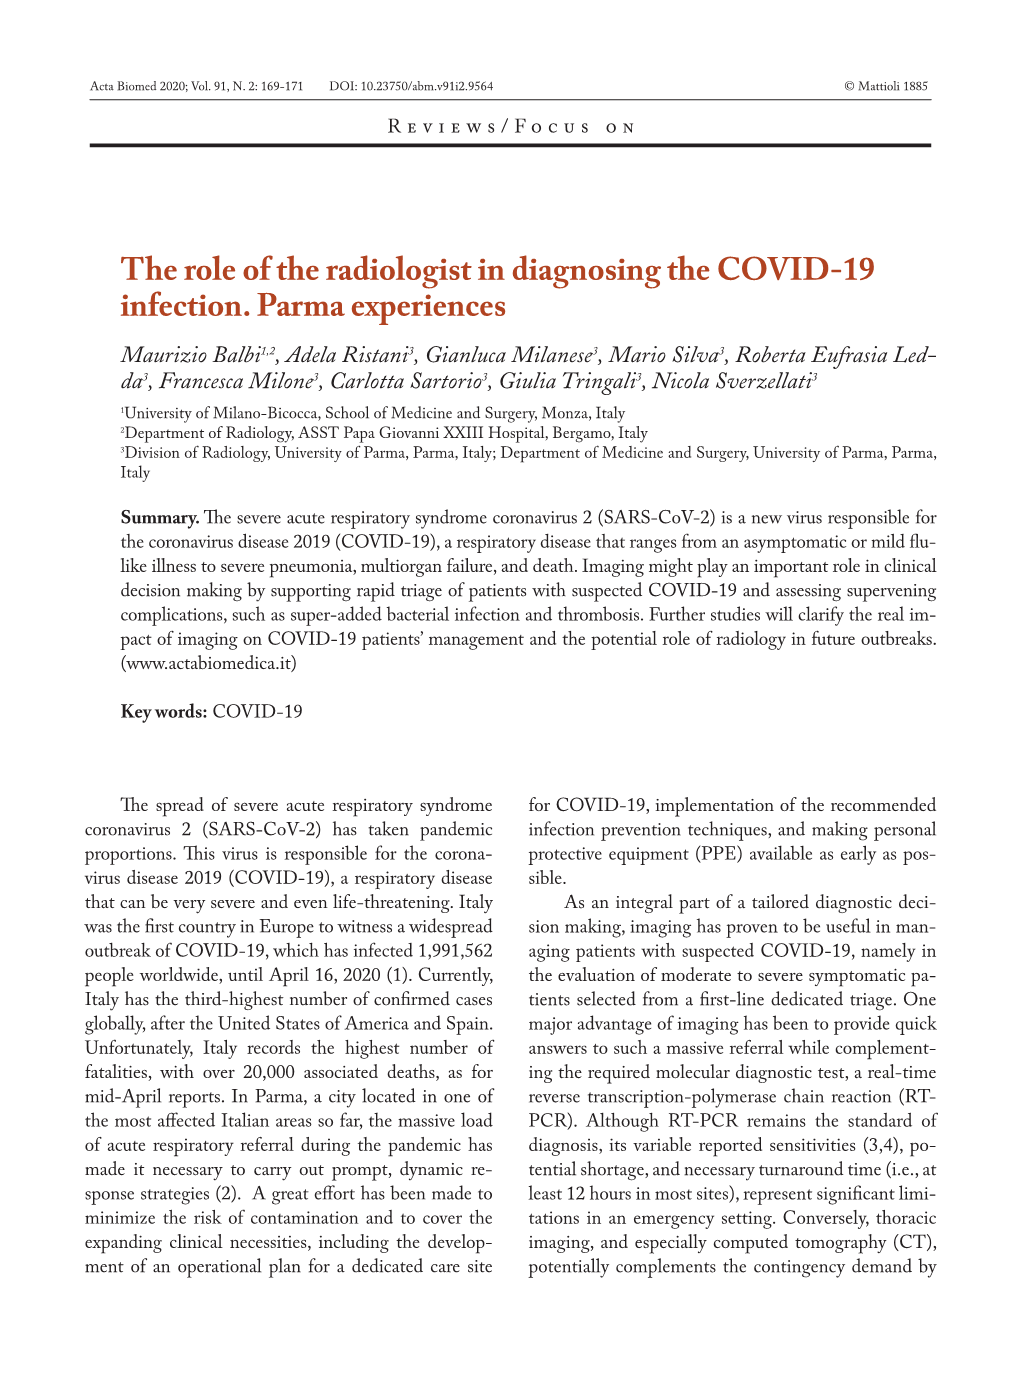 The Role of the Radiologist in Diagnosing the COVID-19 Infection